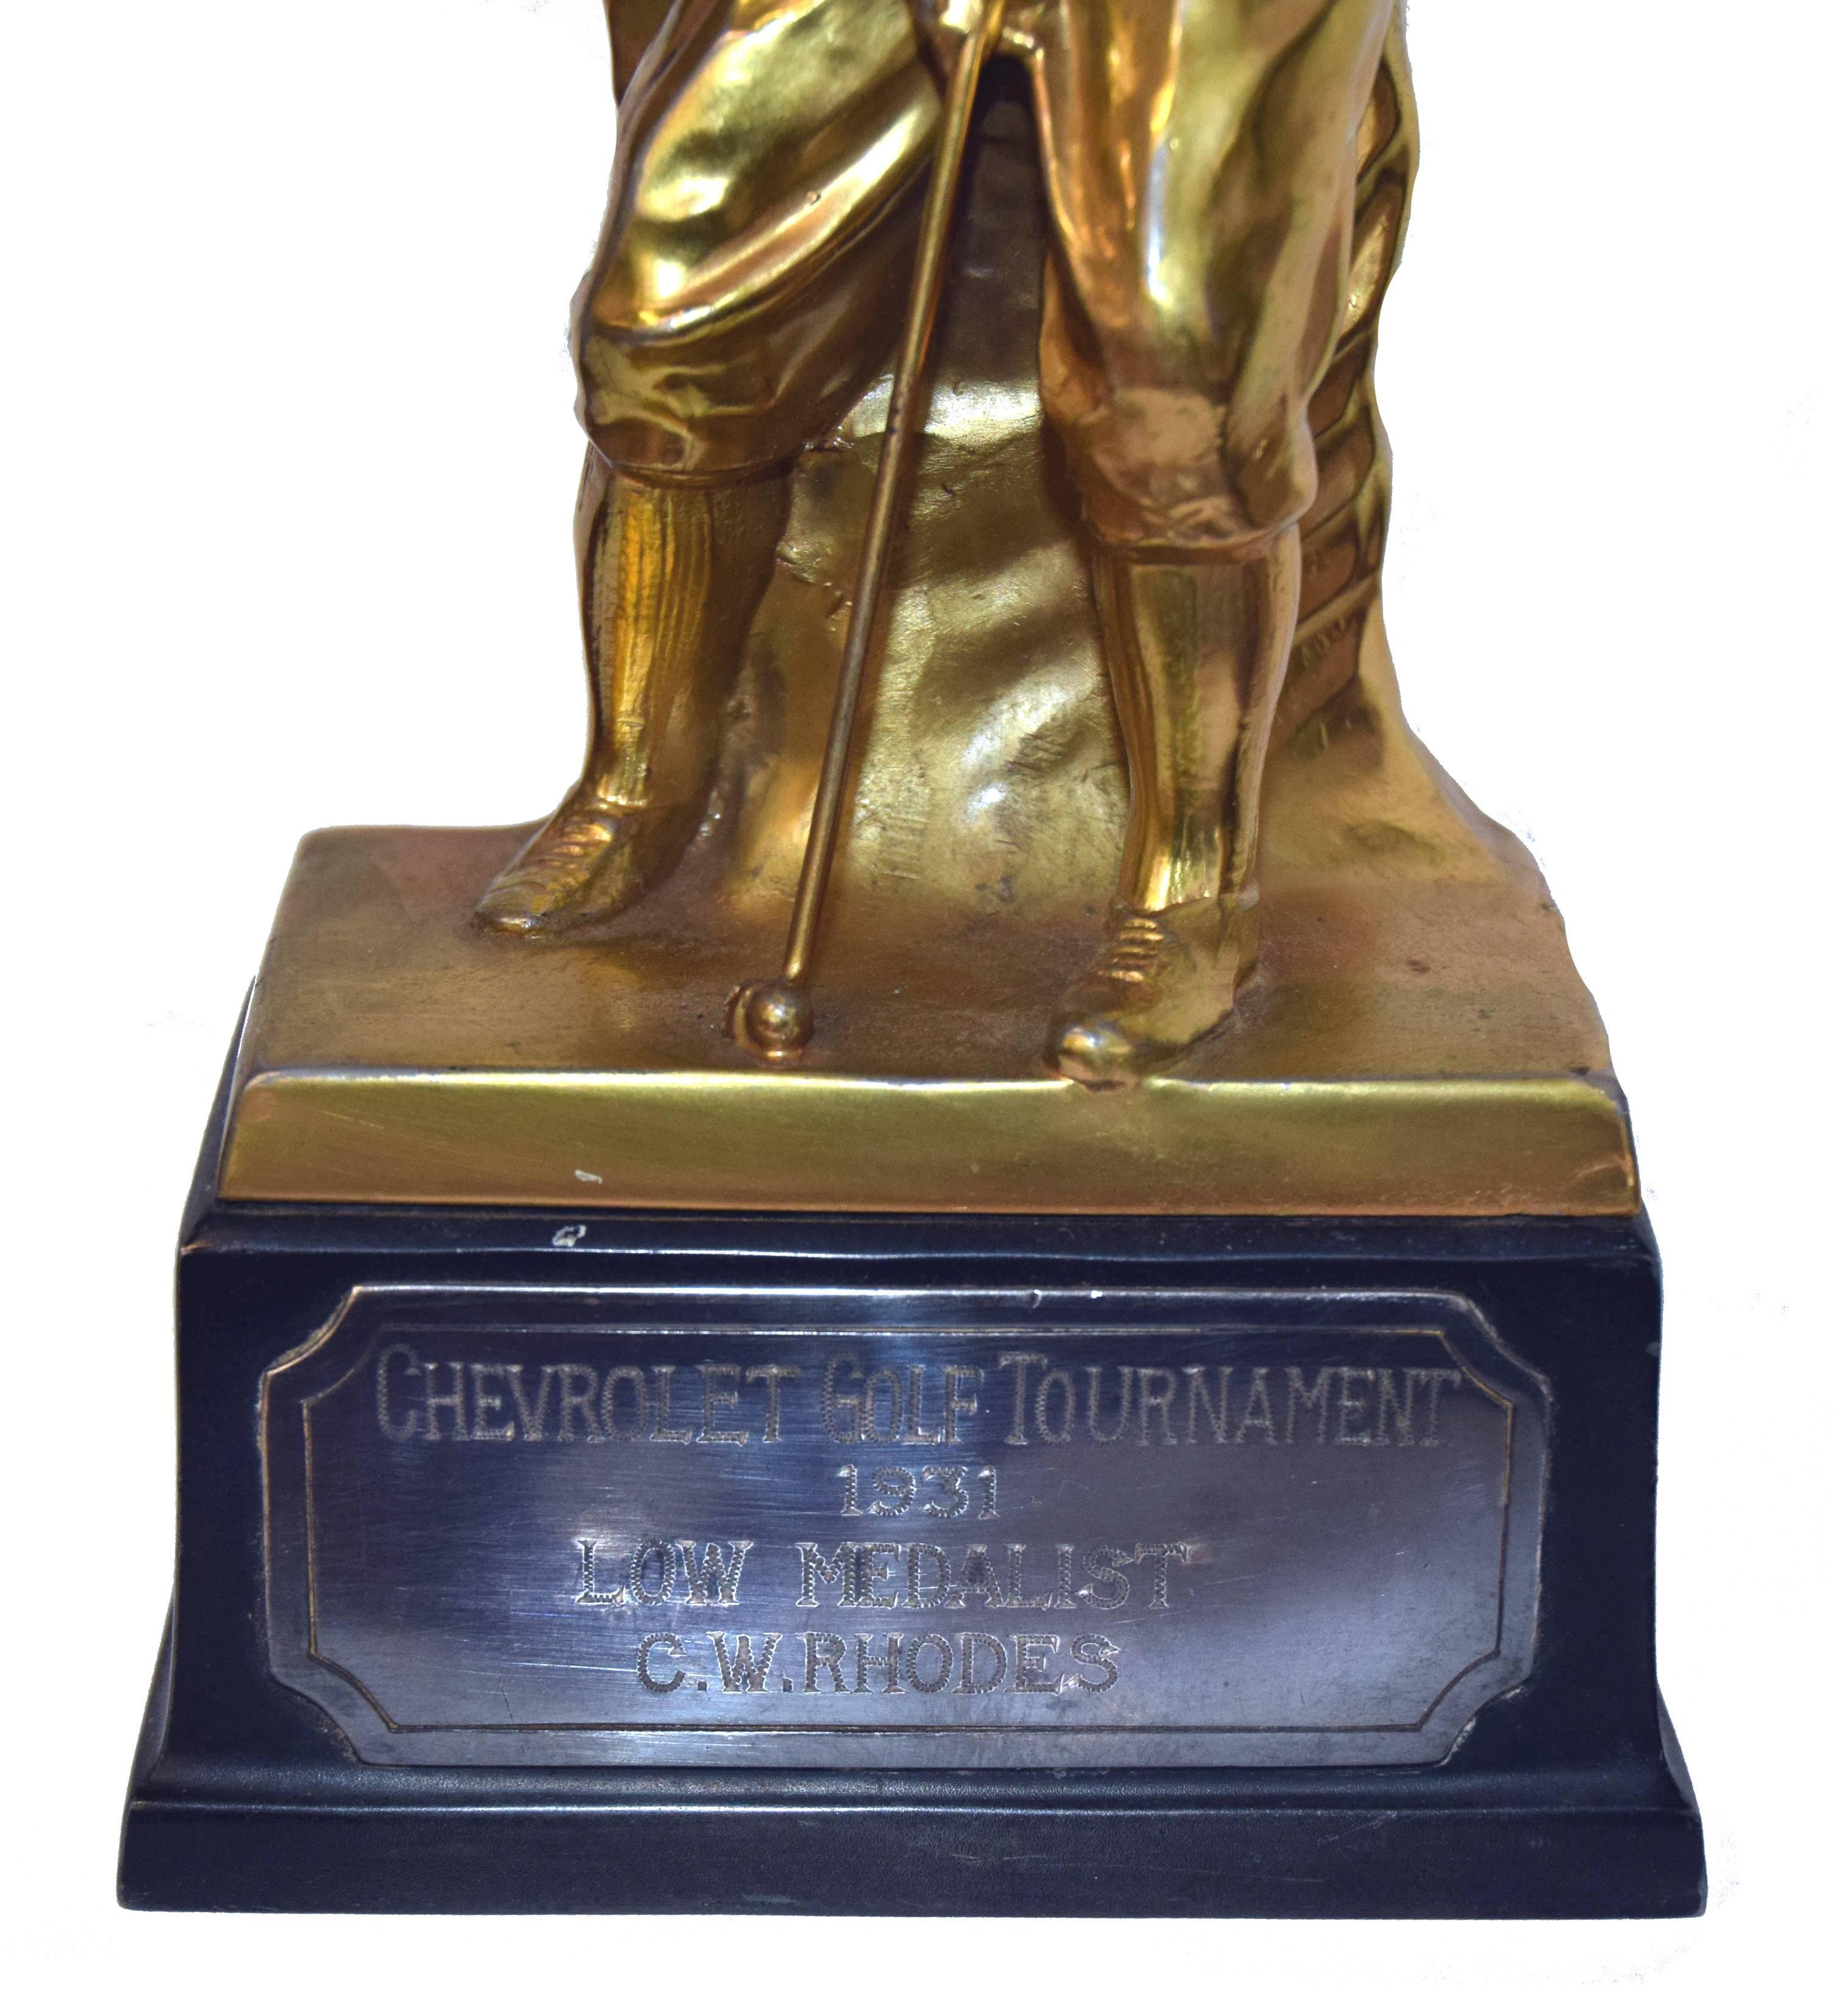 American Chevrolet Golf Tournament 1931 Trophy to C.W. Rhodes - Pullman and Chevrolet